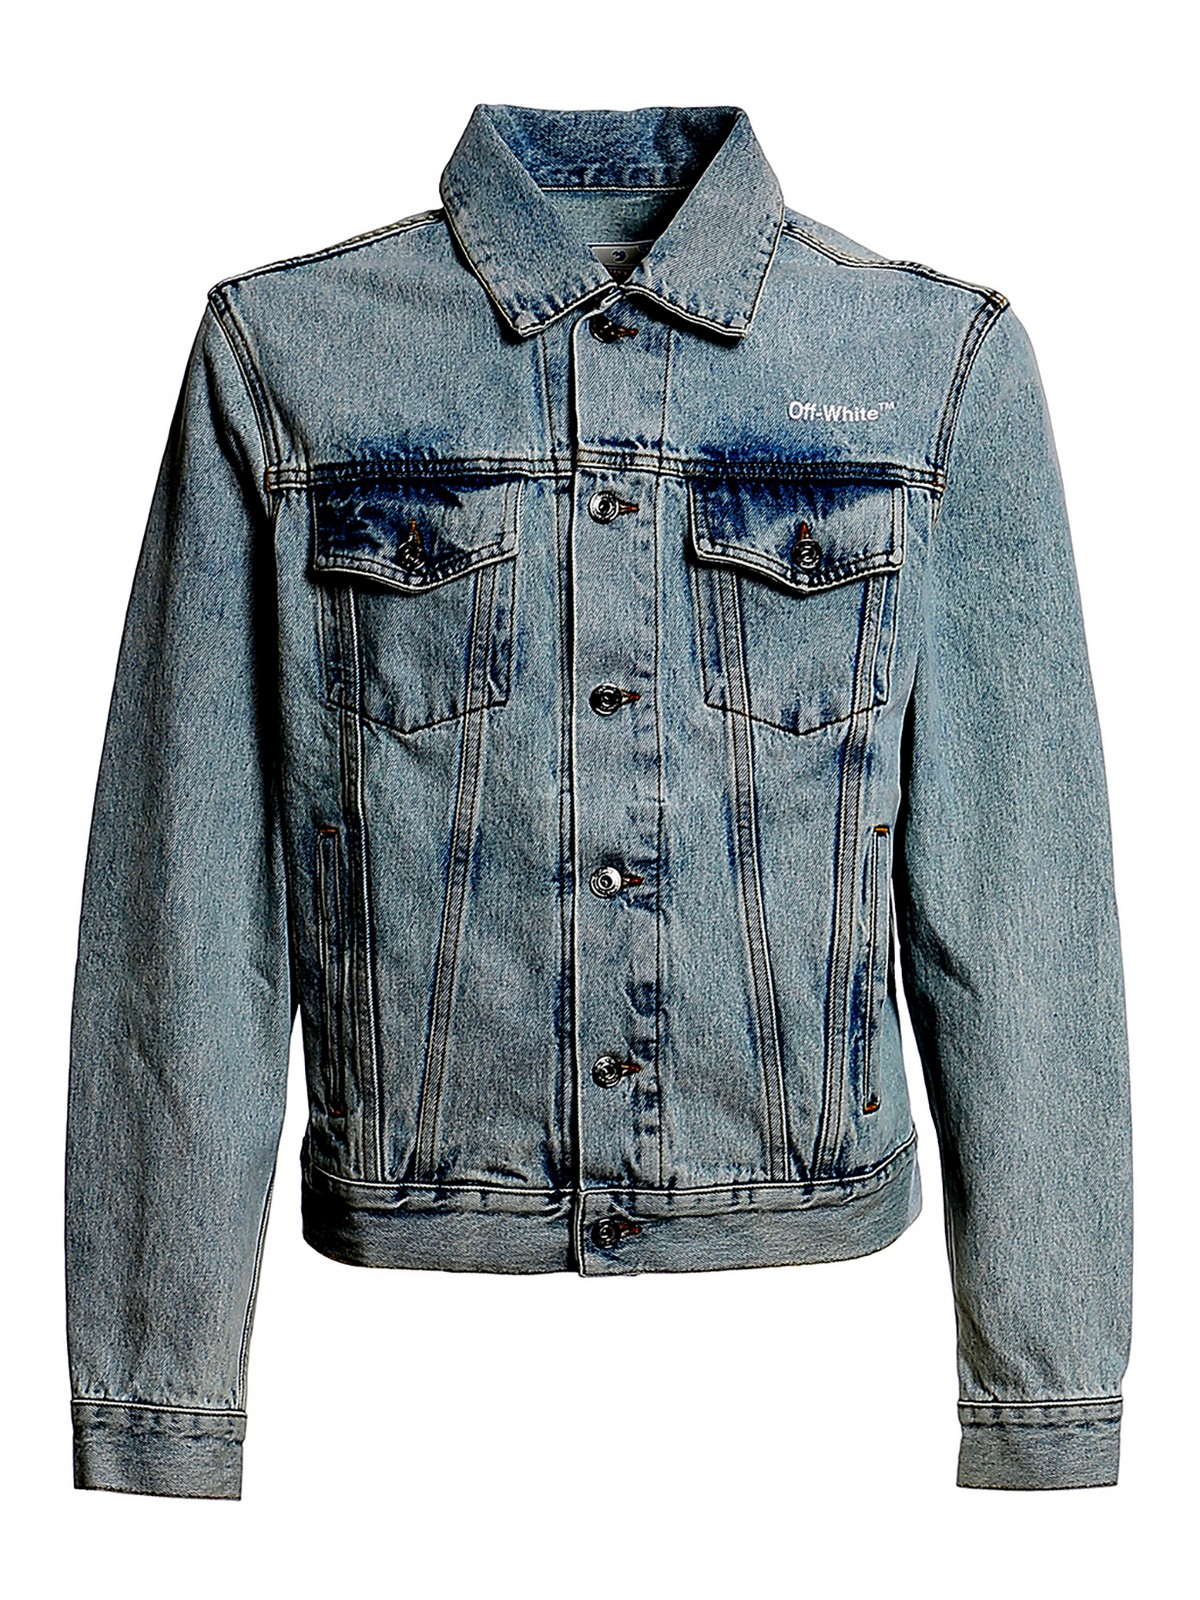 OFF-WHITE boys' denim jackets, compare prices and buy online